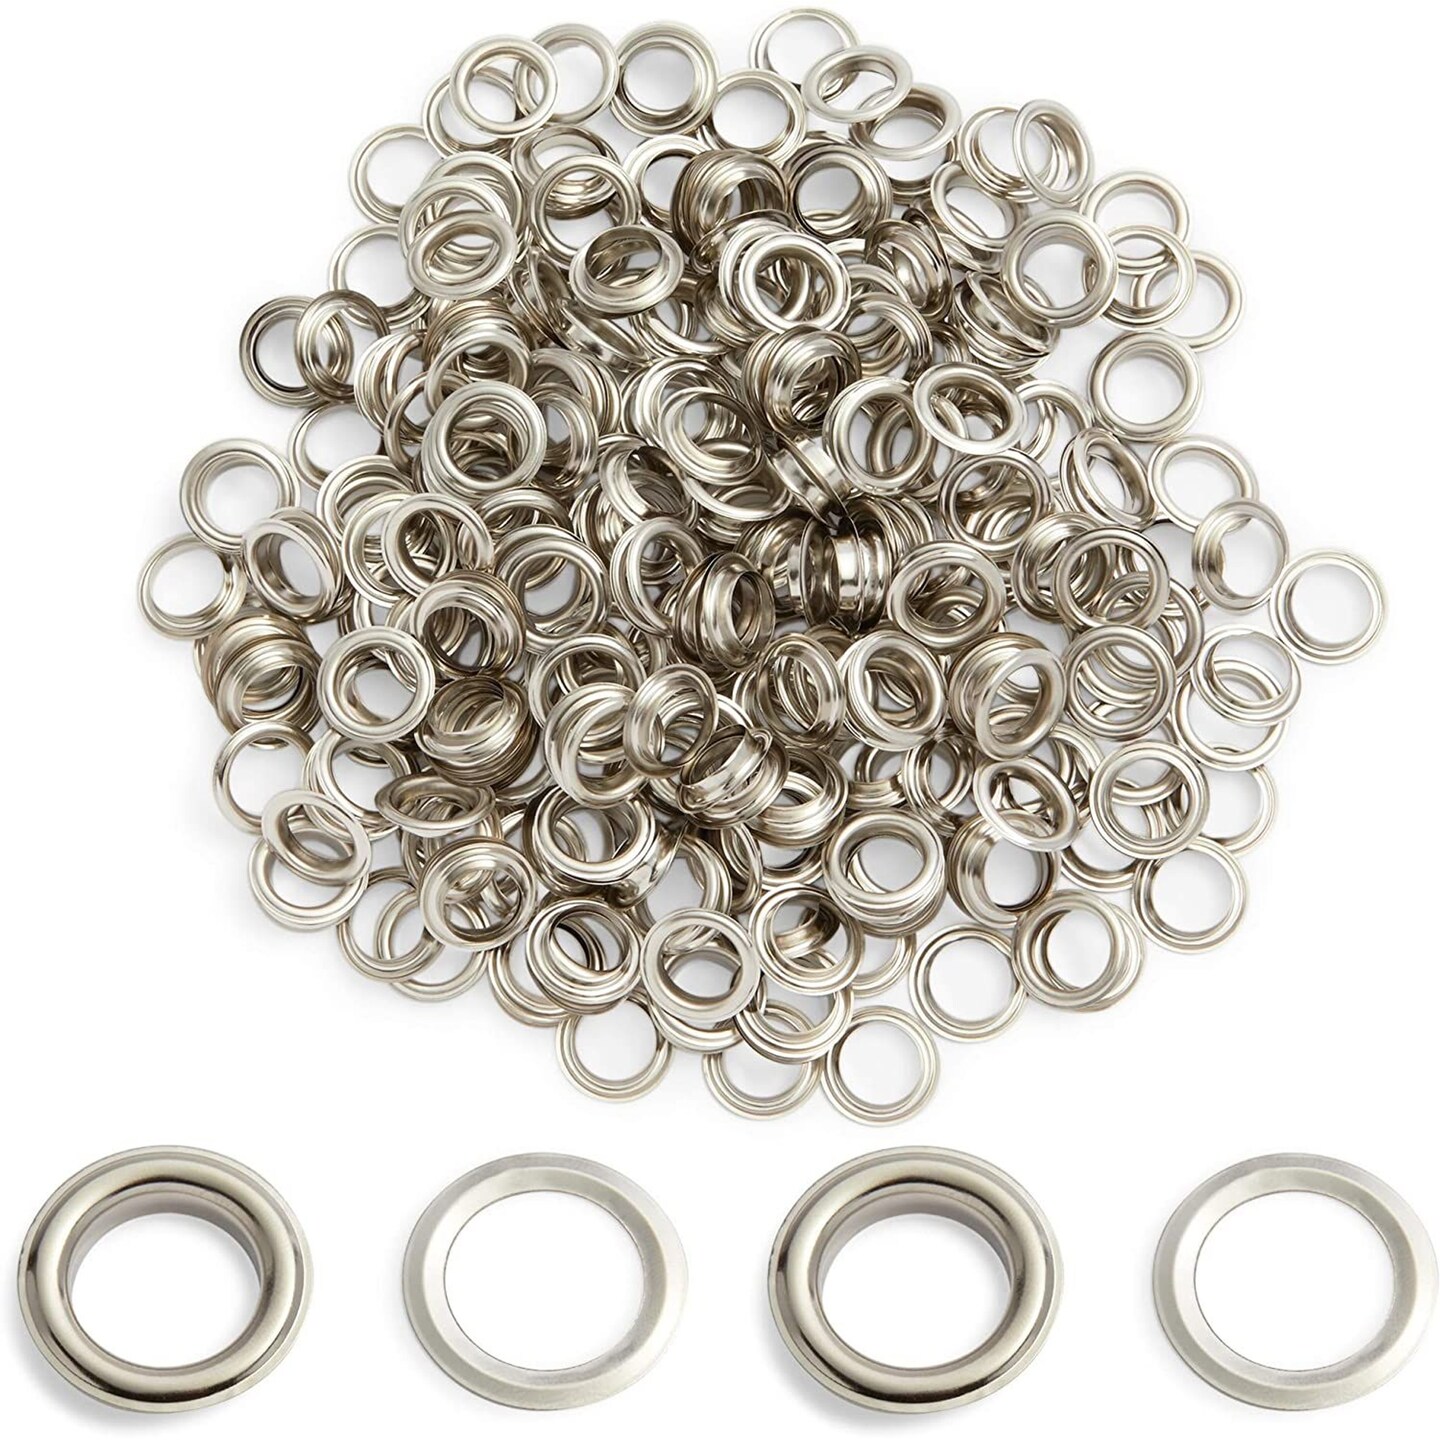 Stainless Steel Grommets / Eyelets